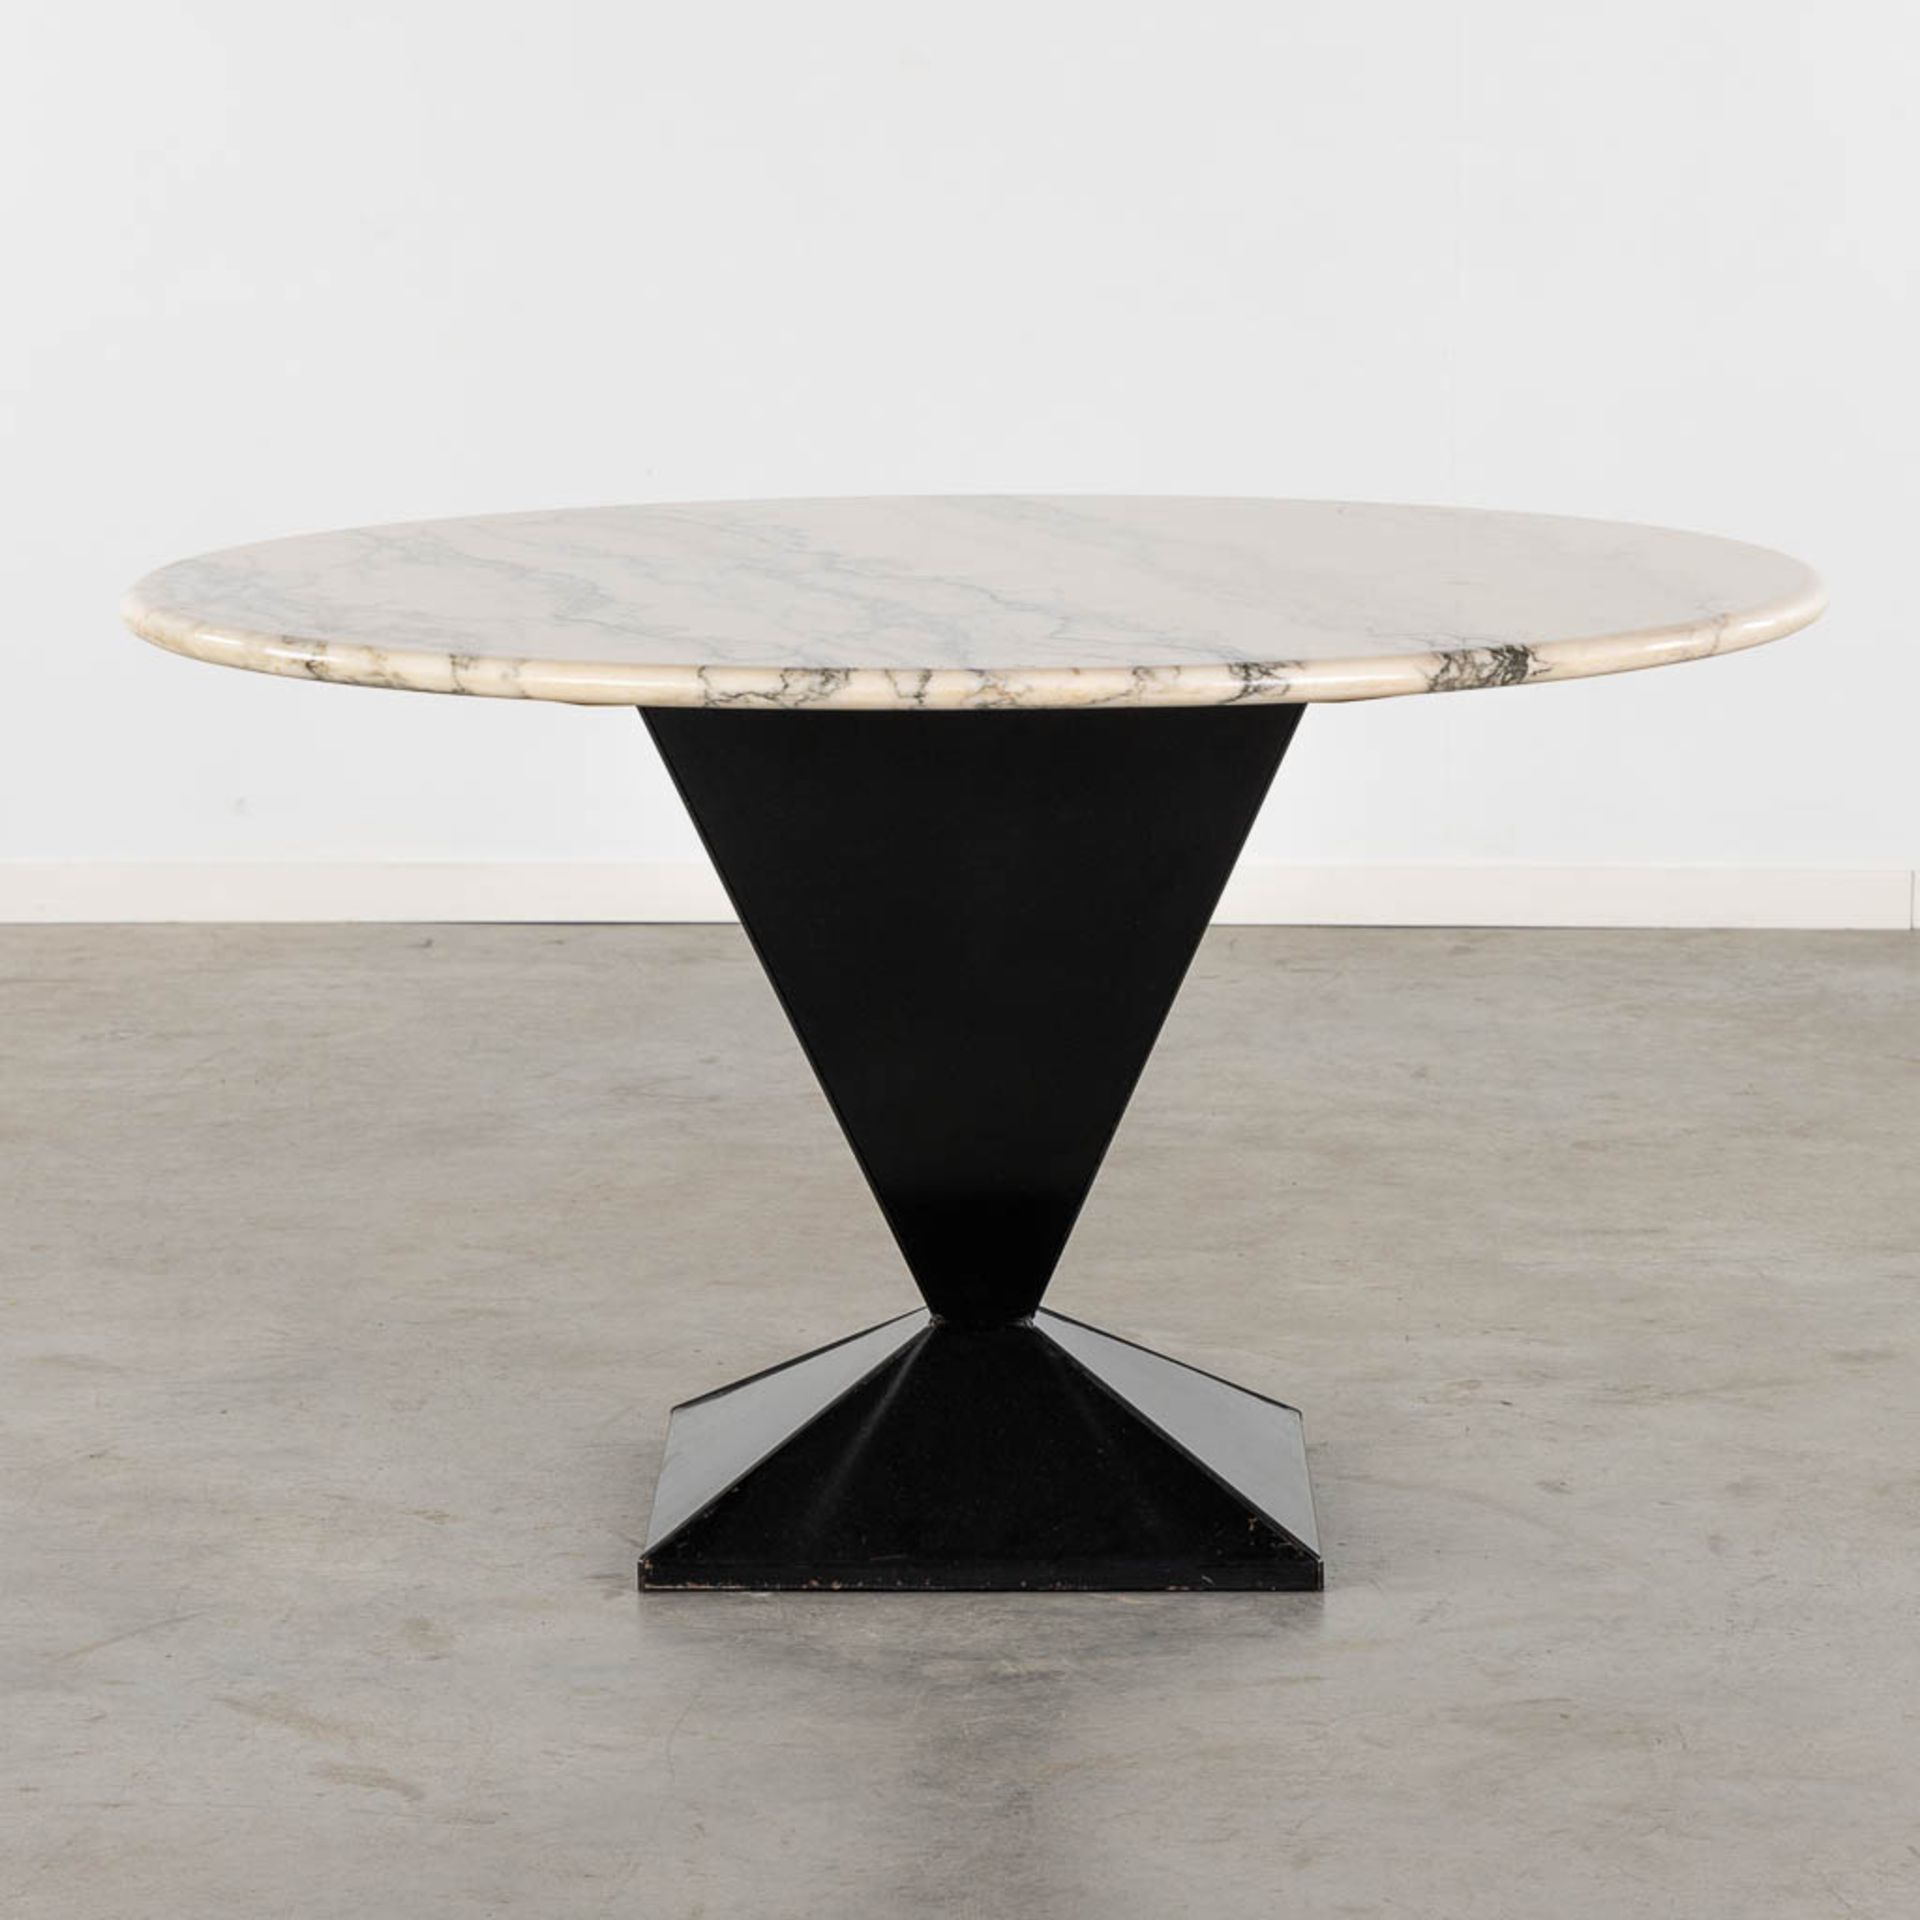 A mid-century table with marble top and a patinated metal base. Circa 1960-1970. (H:73 x D:130 cm) - Image 3 of 9